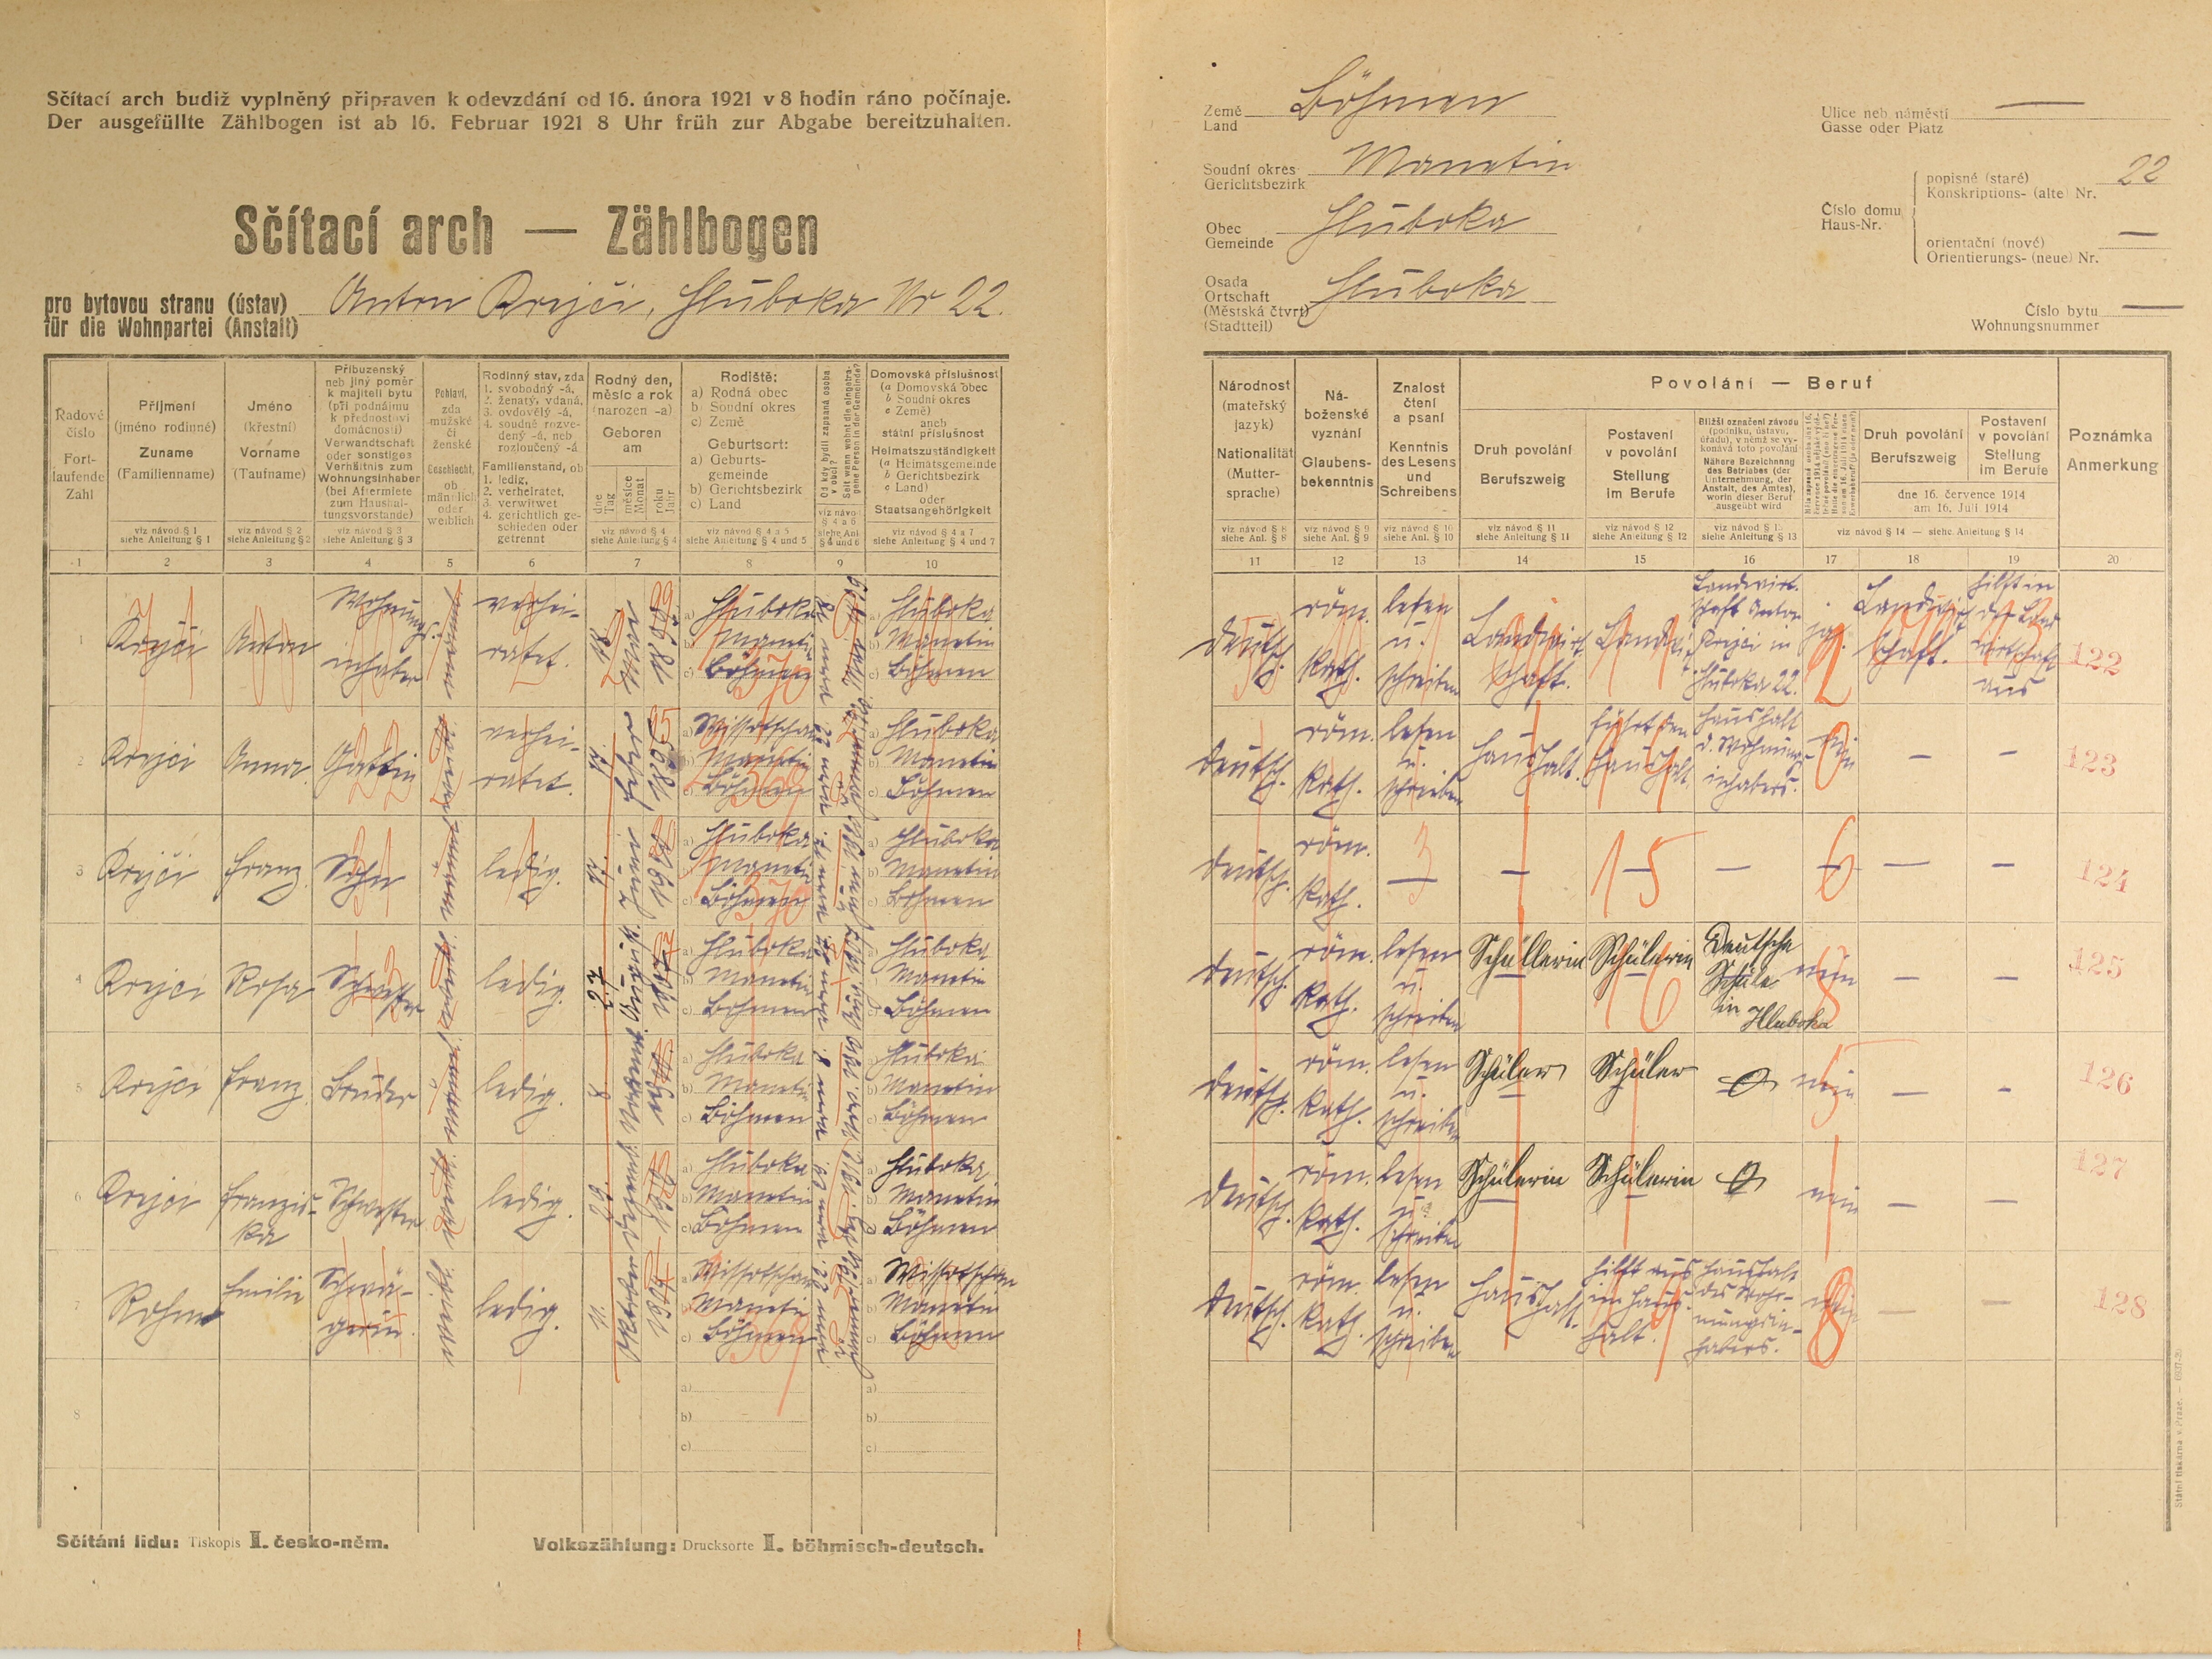 2. soap-ps_00423_census-1921-hluboka-cp022_0020